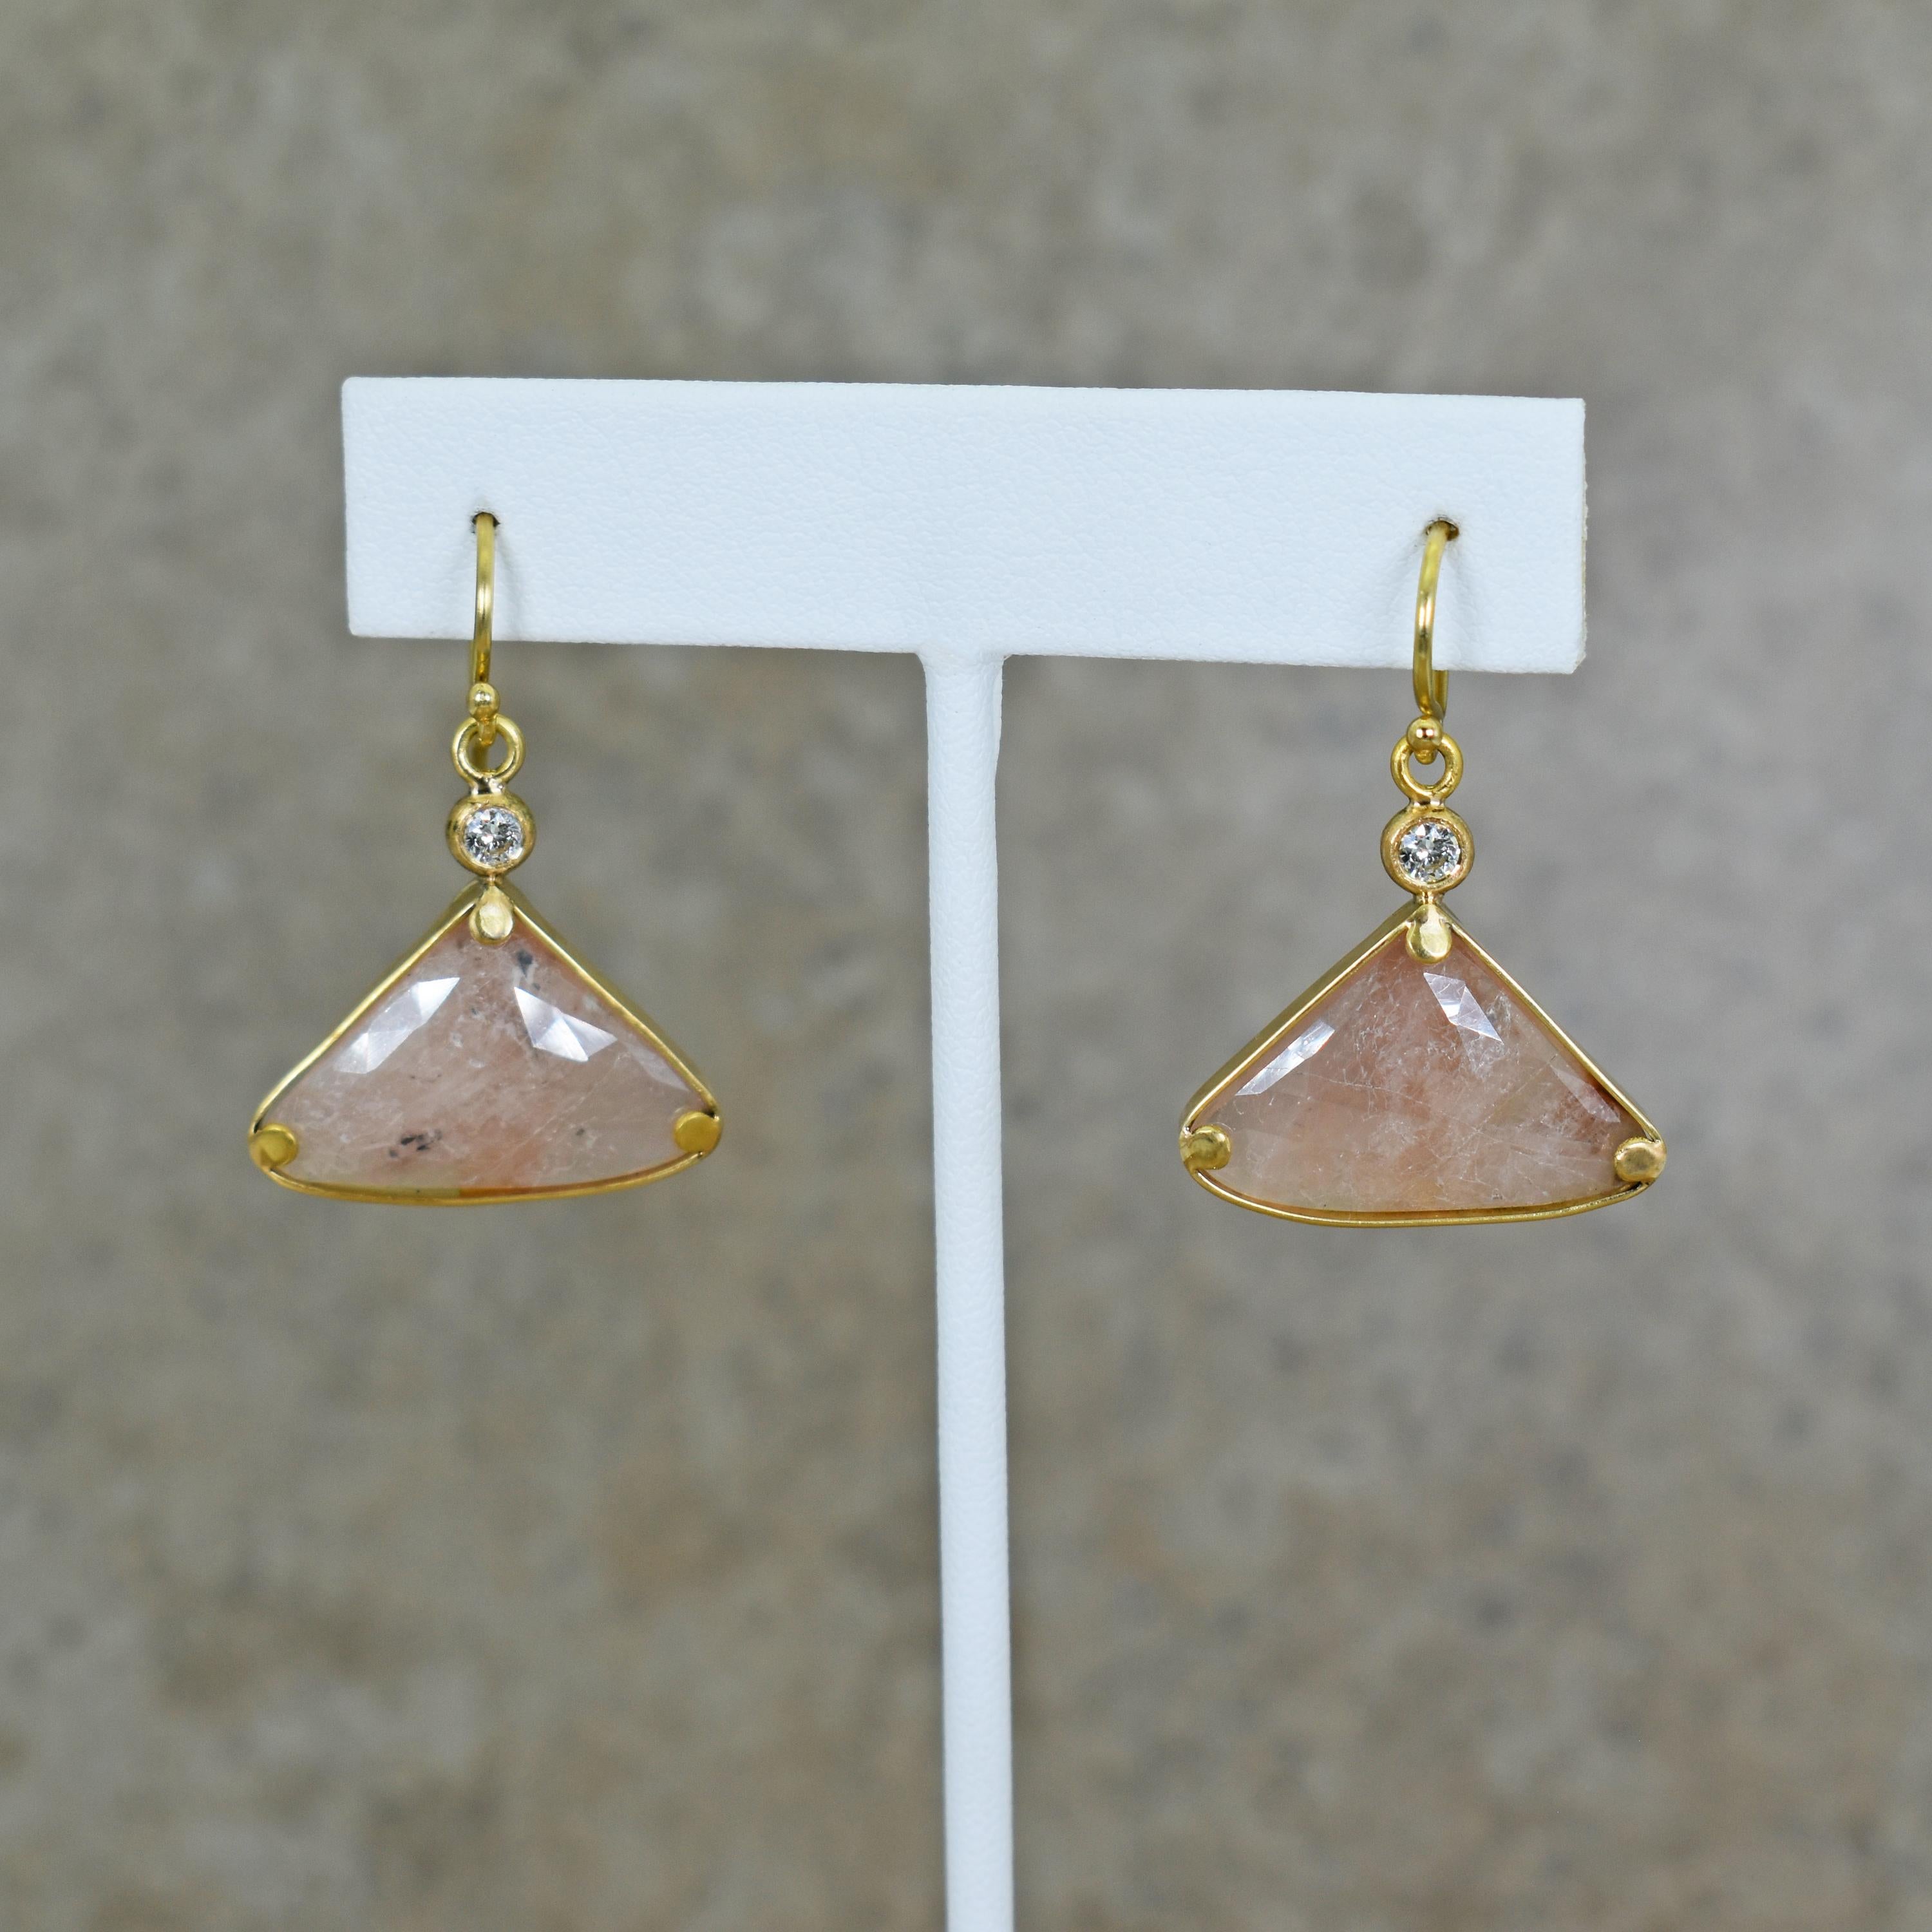 Rose-cut, 23.2 carat total weight light Pink Sapphire and 0.24 carat total weight accent white Diamond 18k yellow gold dangle drop earrings. Dangle earrings are 1.25 inches in length.